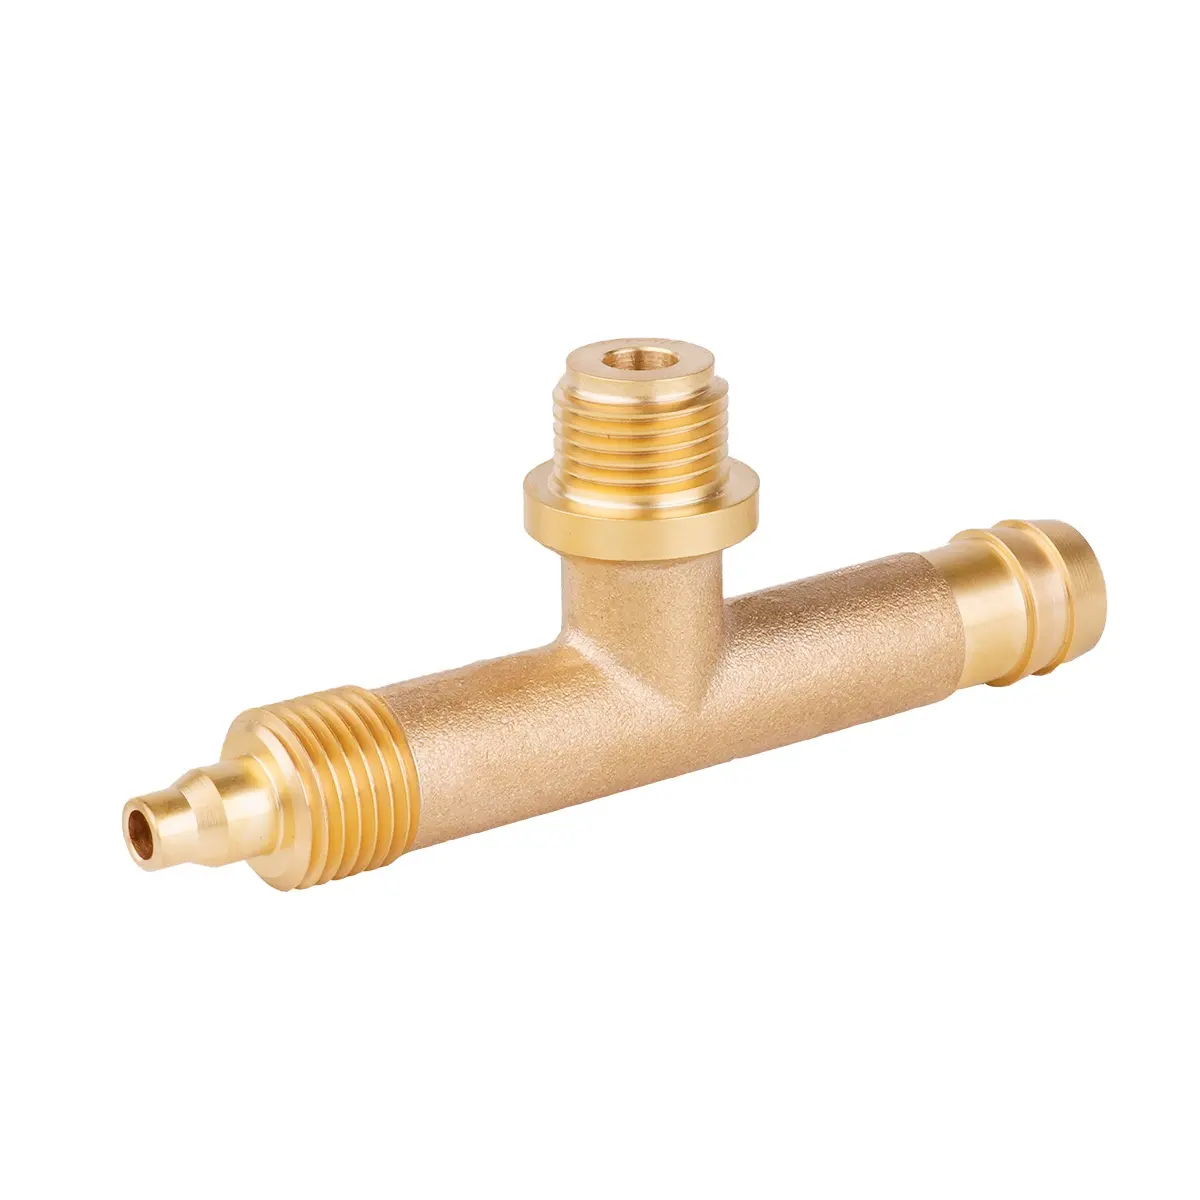 Yongchuang YCAQF bronze pressure safety relief valves for coffee machine boiler steam